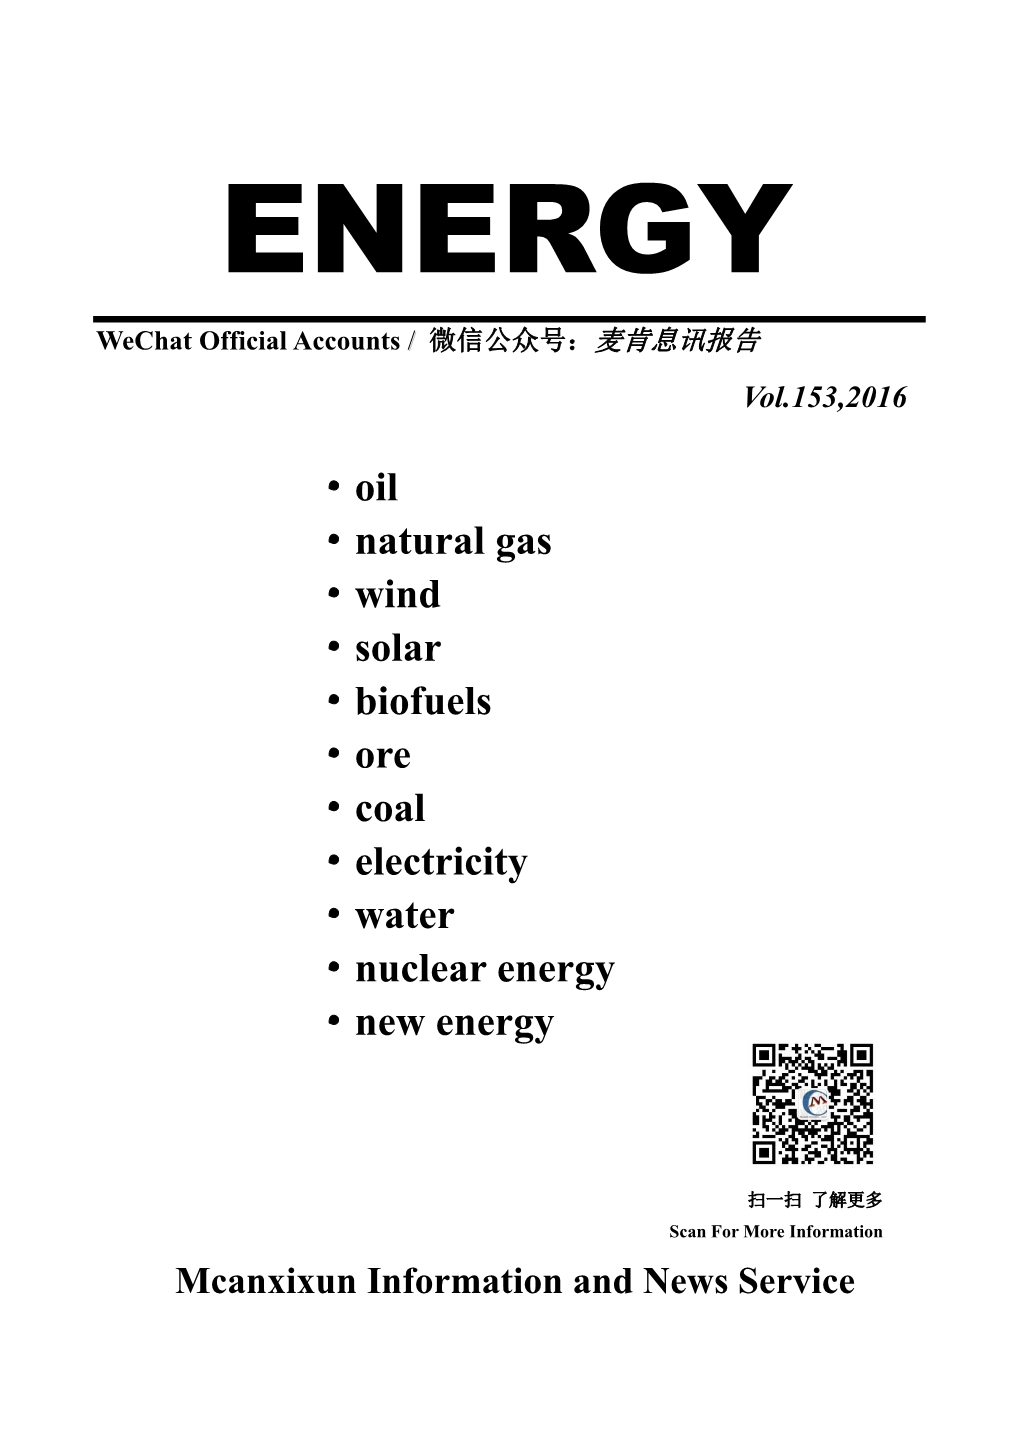 Coal ·Electricity ·Water ·Nuclear Energy ·New Energy